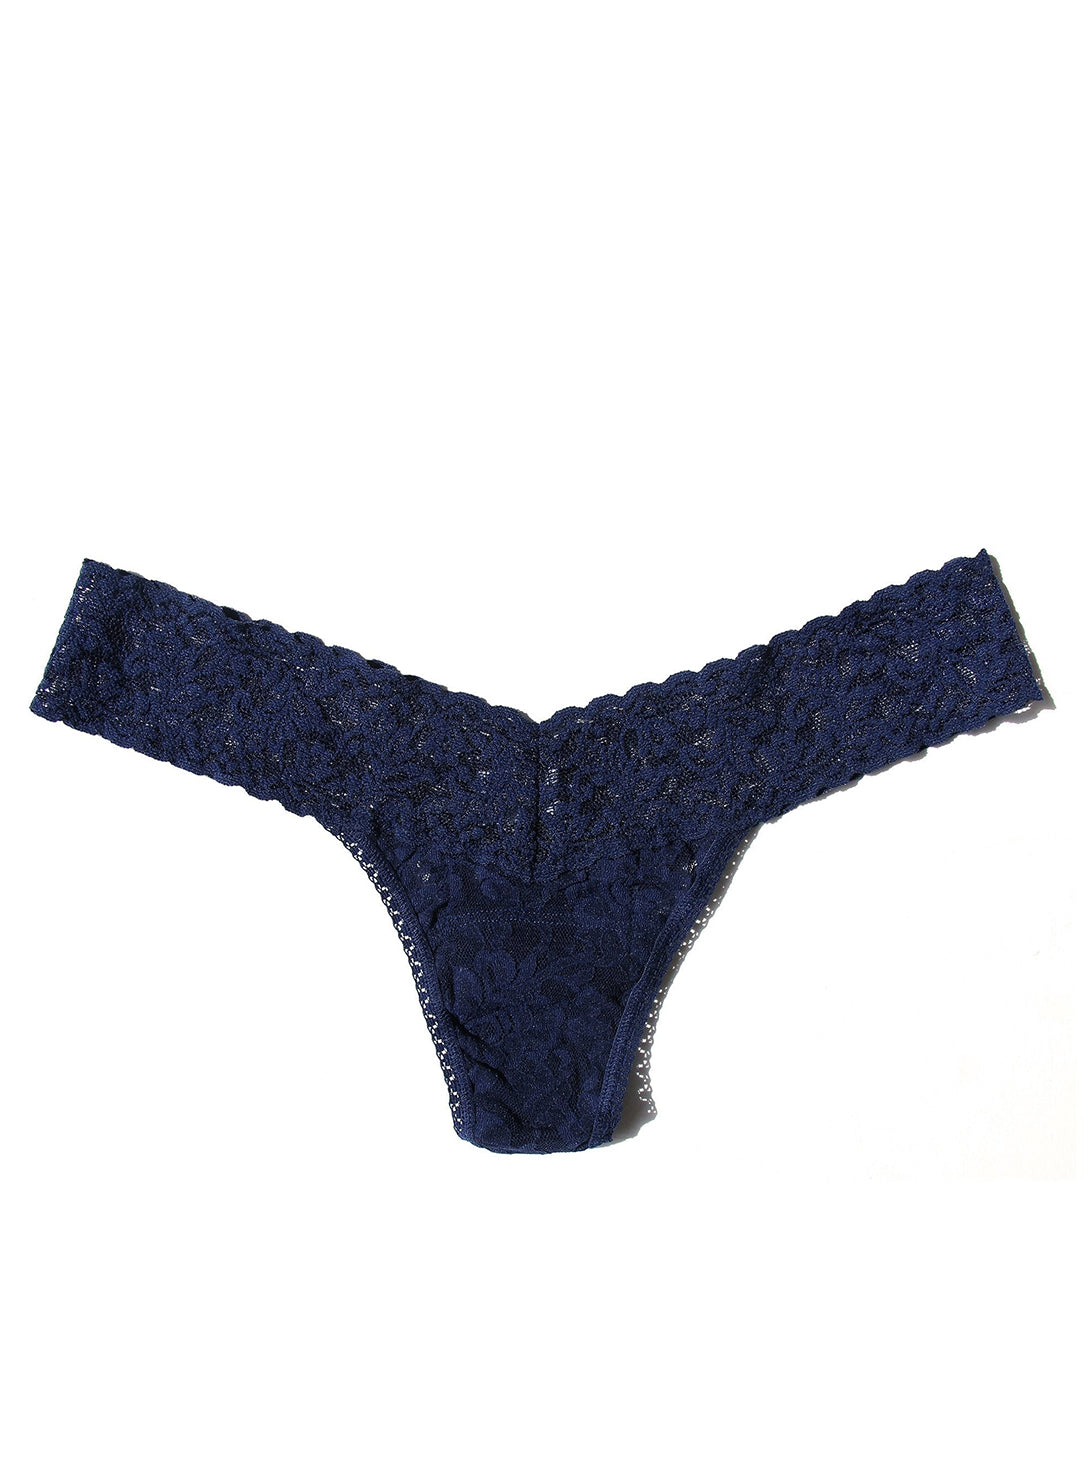 Hanky Panky Low Rise Thong in Navy